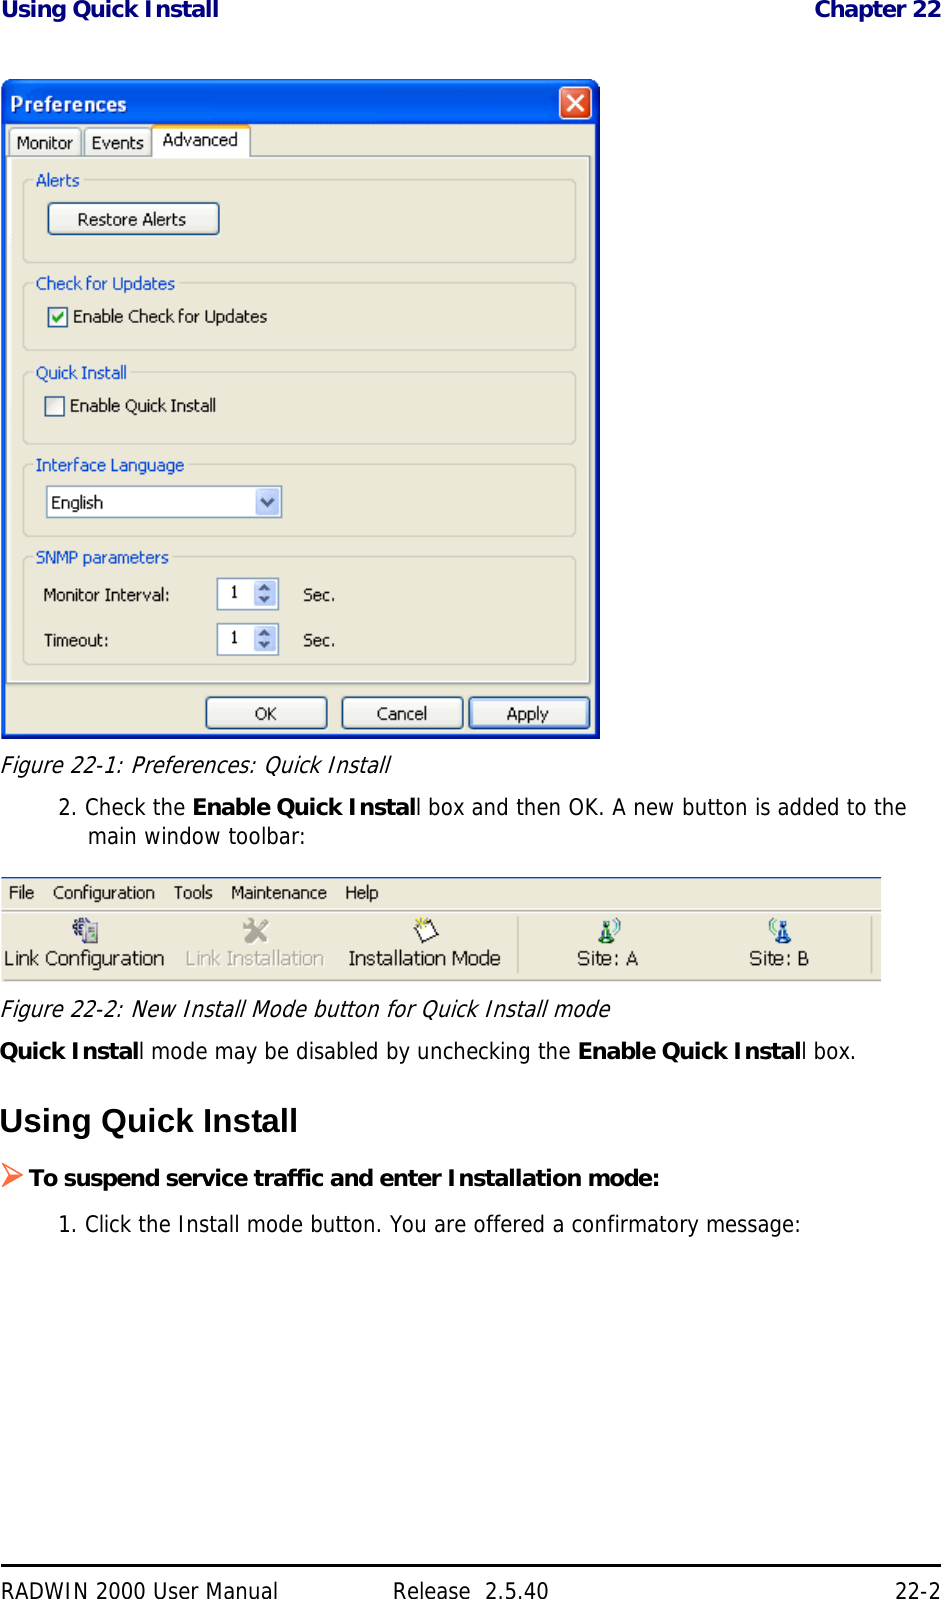 Using Quick Install Chapter 22RADWIN 2000 User Manual Release  2.5.40 22-2Figure 22-1: Preferences: Quick Install2. Check the Enable Quick Install box and then OK. A new button is added to the main window toolbar:Figure 22-2: New Install Mode button for Quick Install modeQuick Install mode may be disabled by unchecking the Enable Quick Install box.Using Quick InstallTo suspend service traffic and enter Installation mode:1. Click the Install mode button. You are offered a confirmatory message: